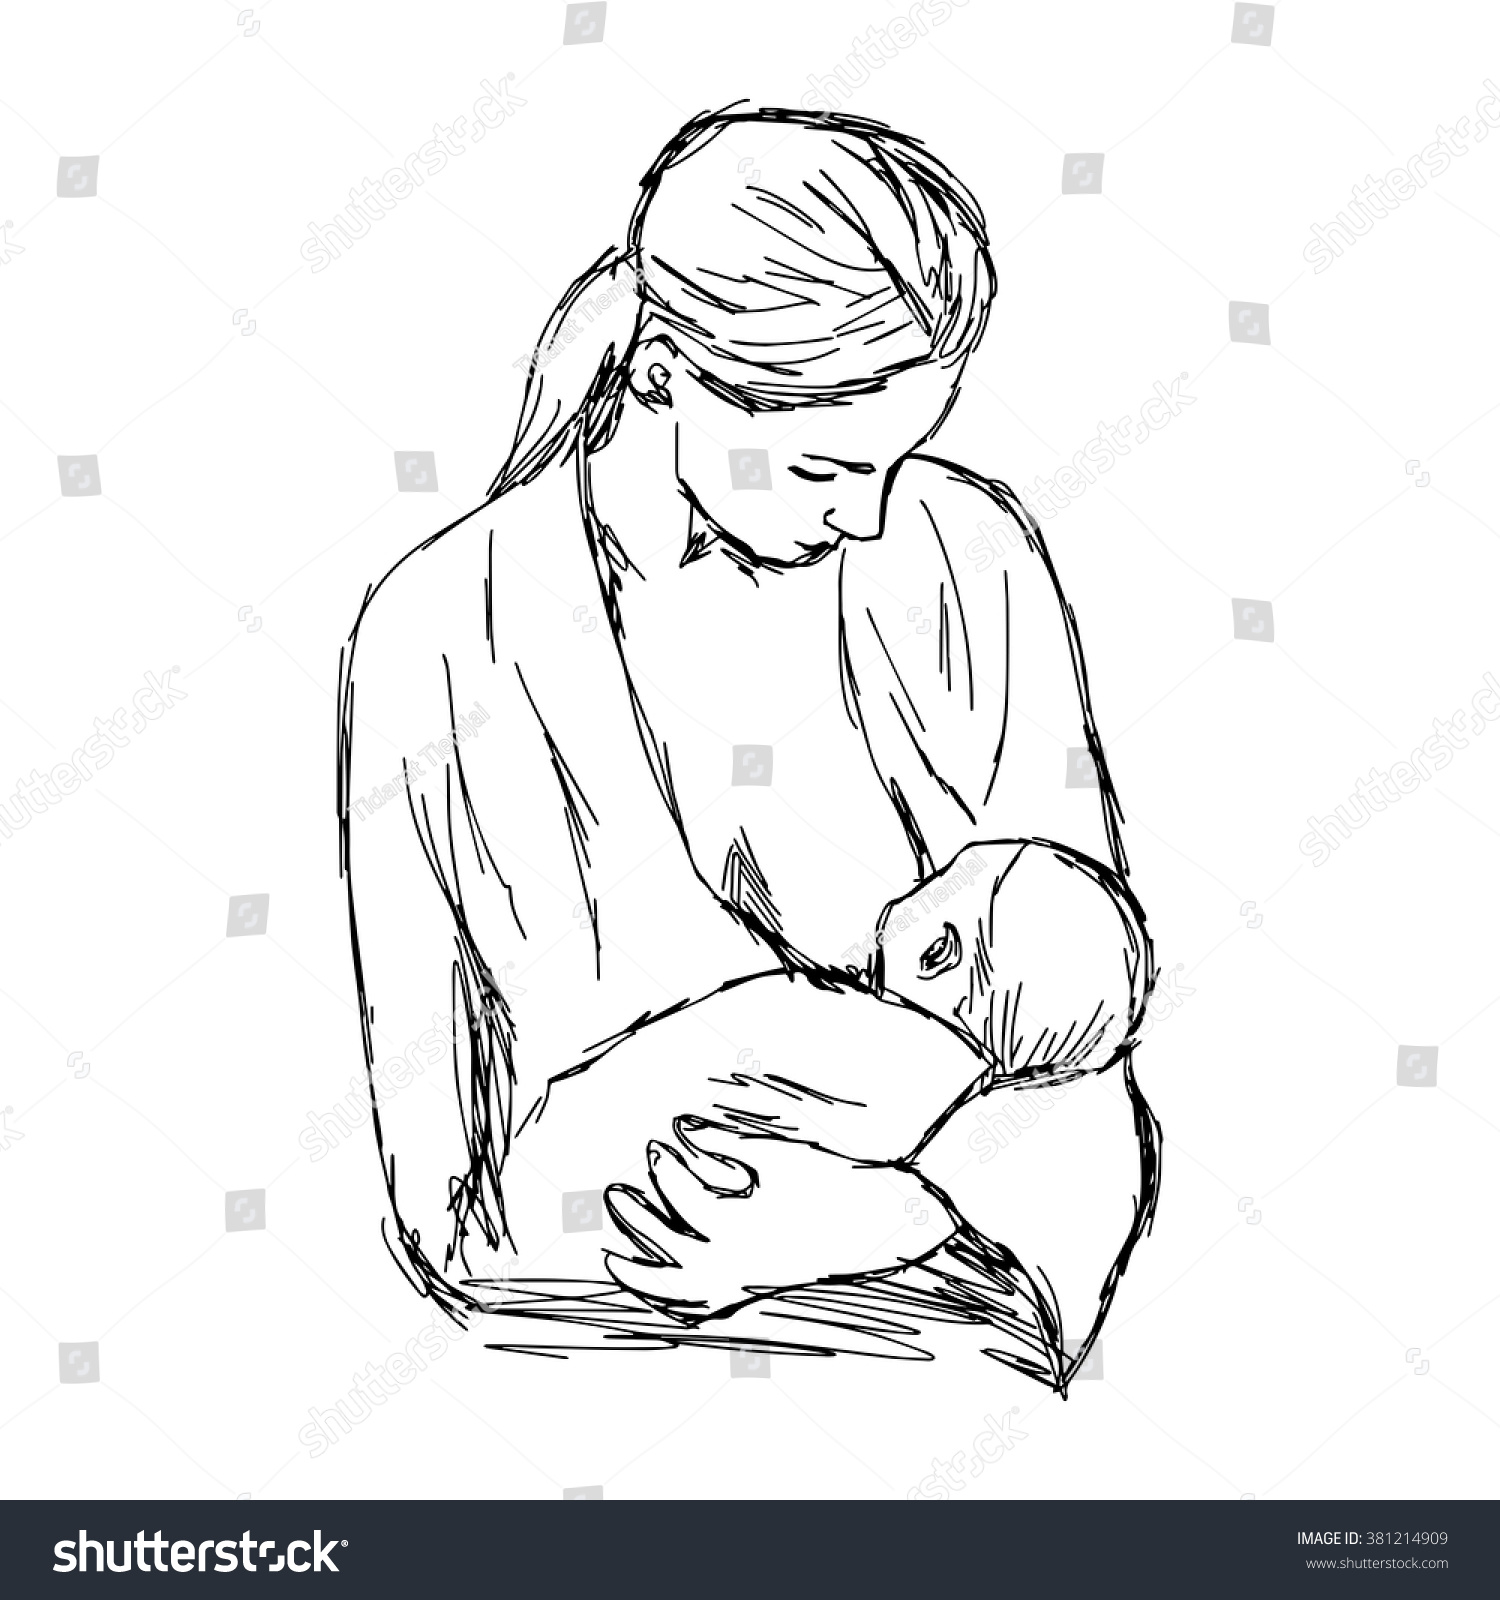 Illustration Vector Doodle Hand Drawn Of Sketch Baby Feeds On Mom'S